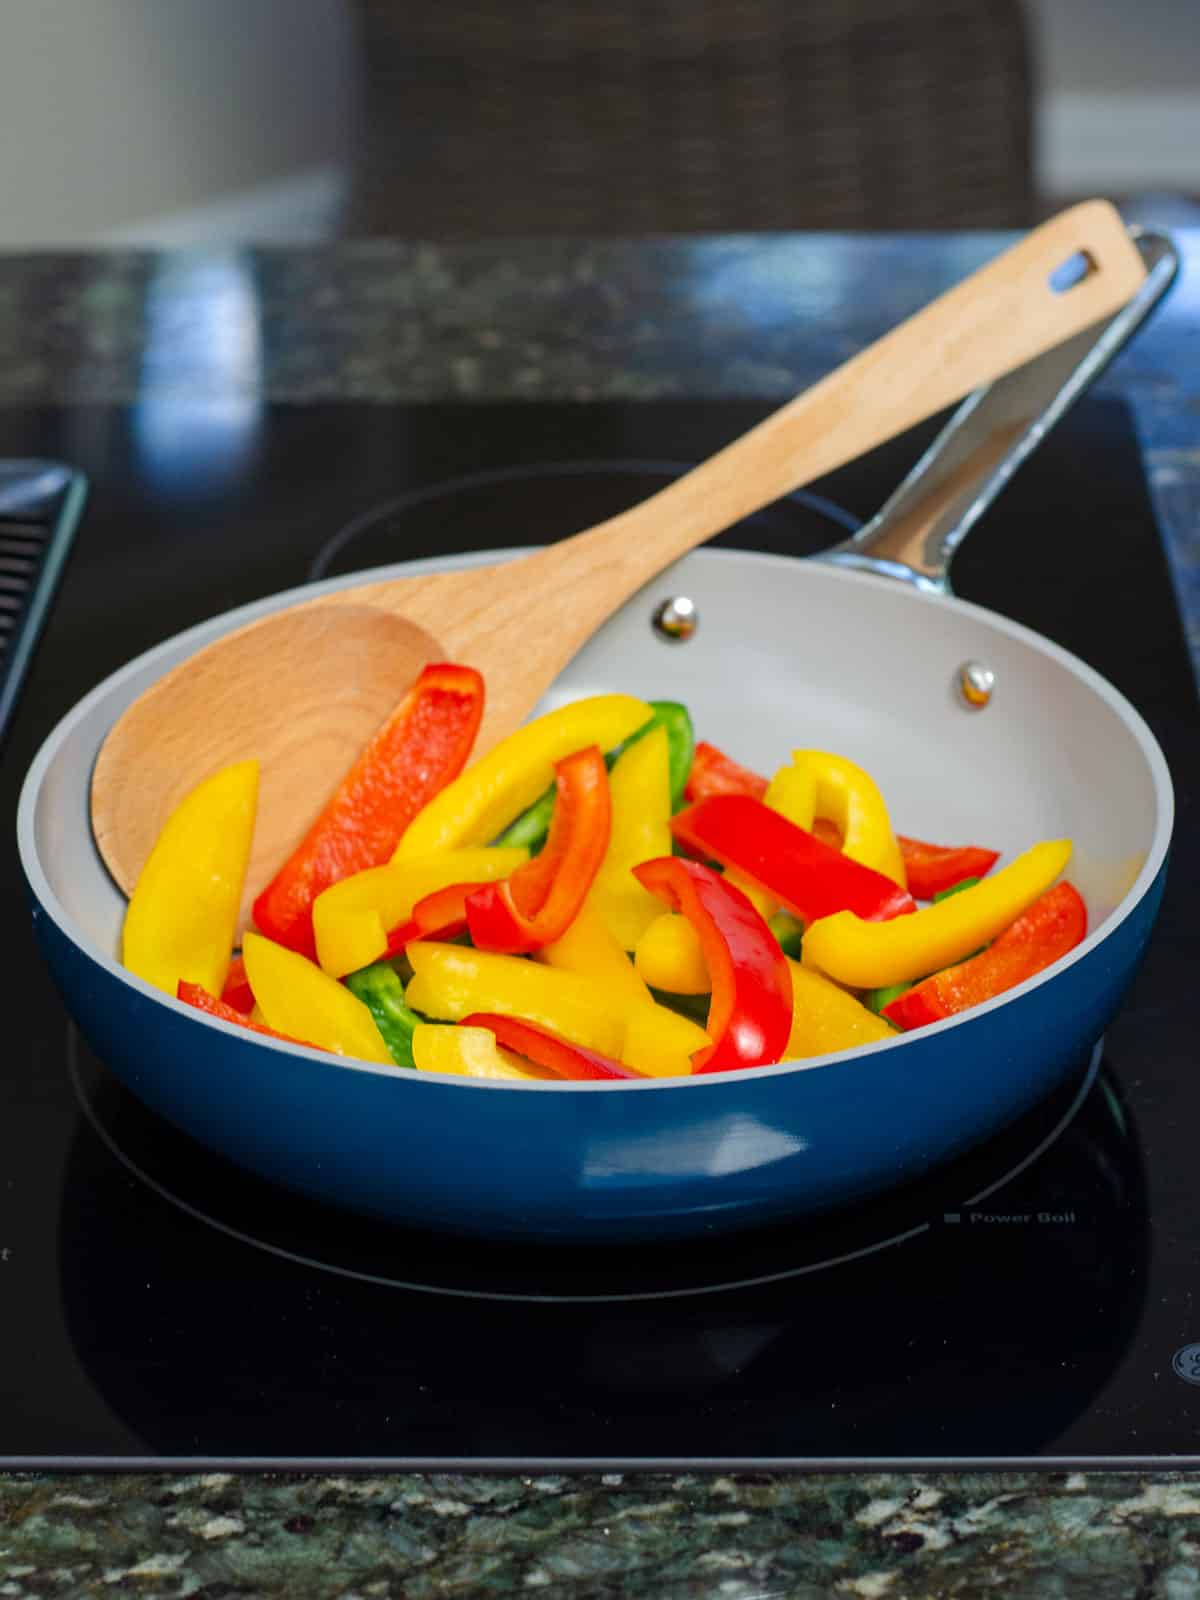 Blue fry pan with peppers on stove.